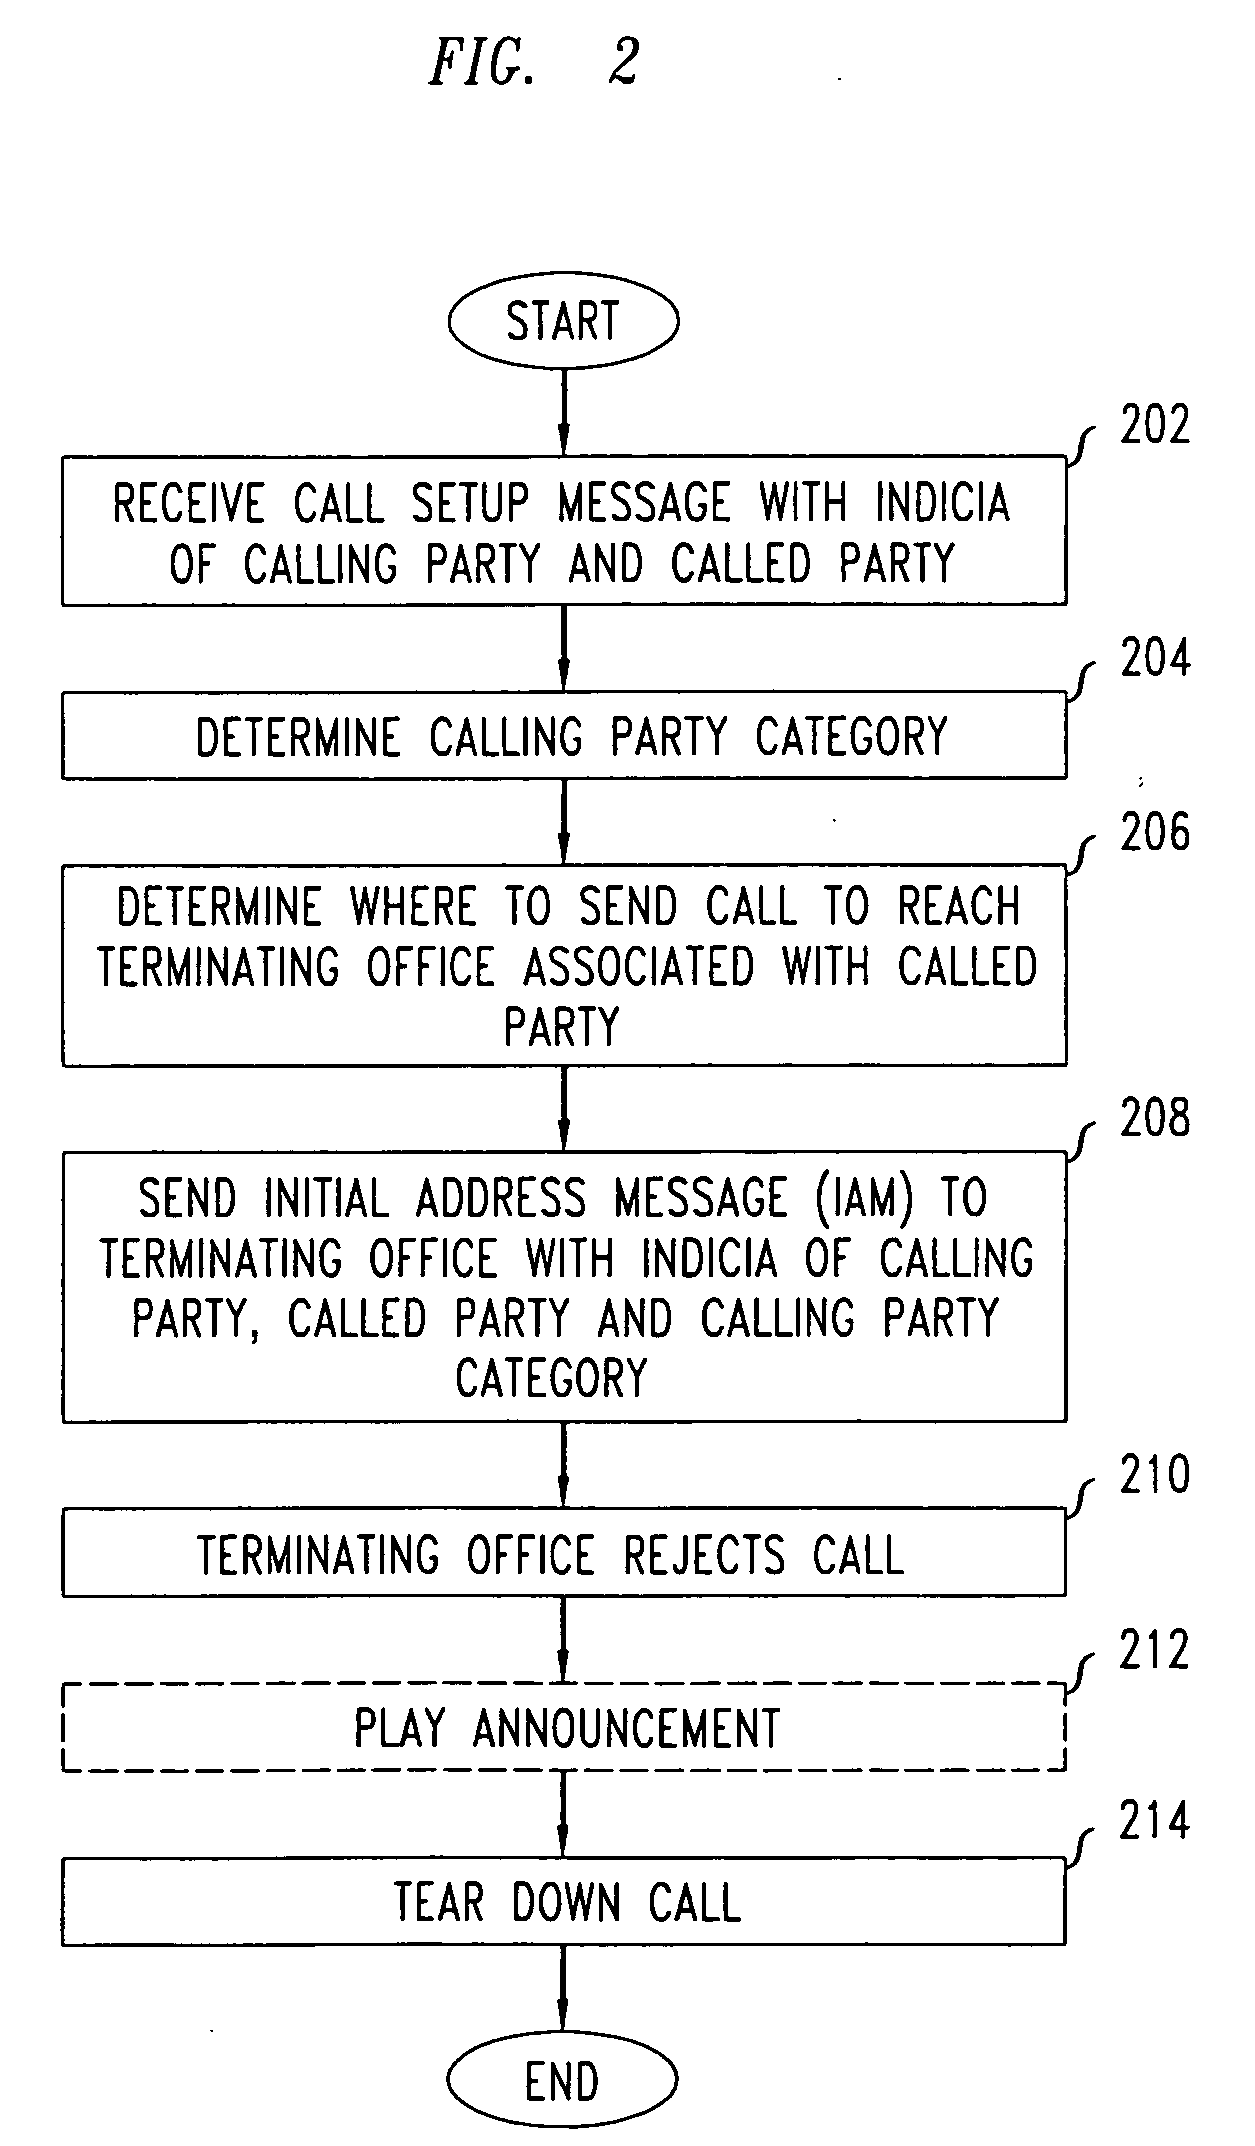 Network support for blocking calls based on calling party category